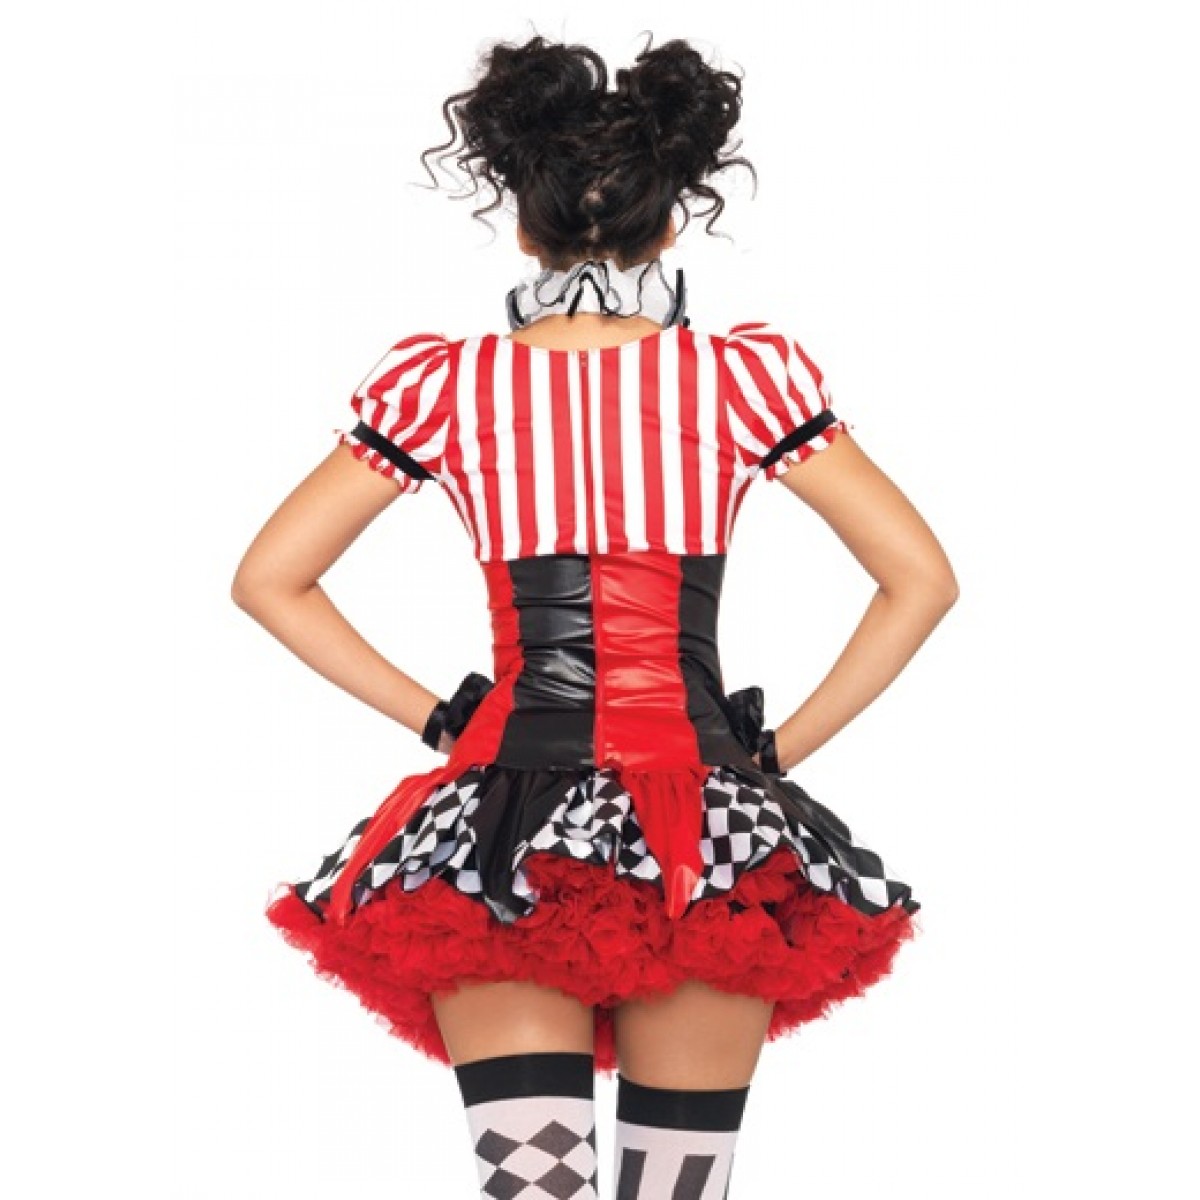 Black and Red Harlequin Clown Womens Costume Set by Leg Avenue